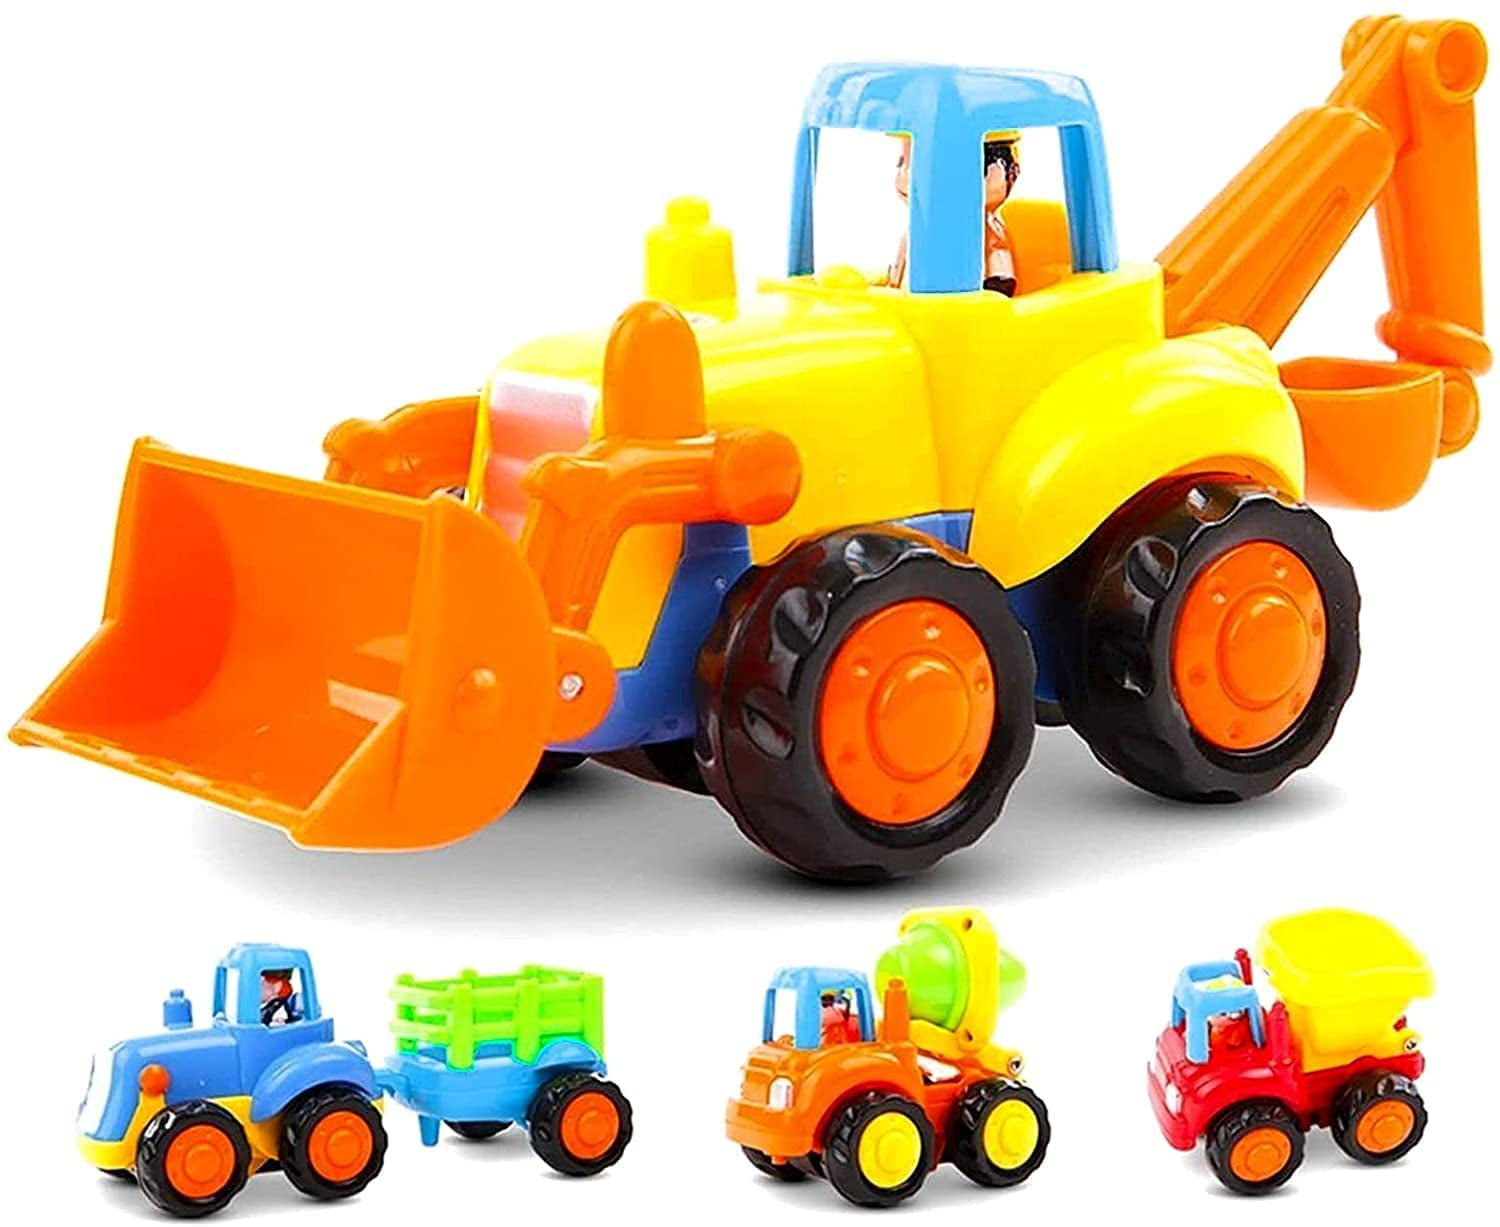 Rc Construction Equipment For Adults